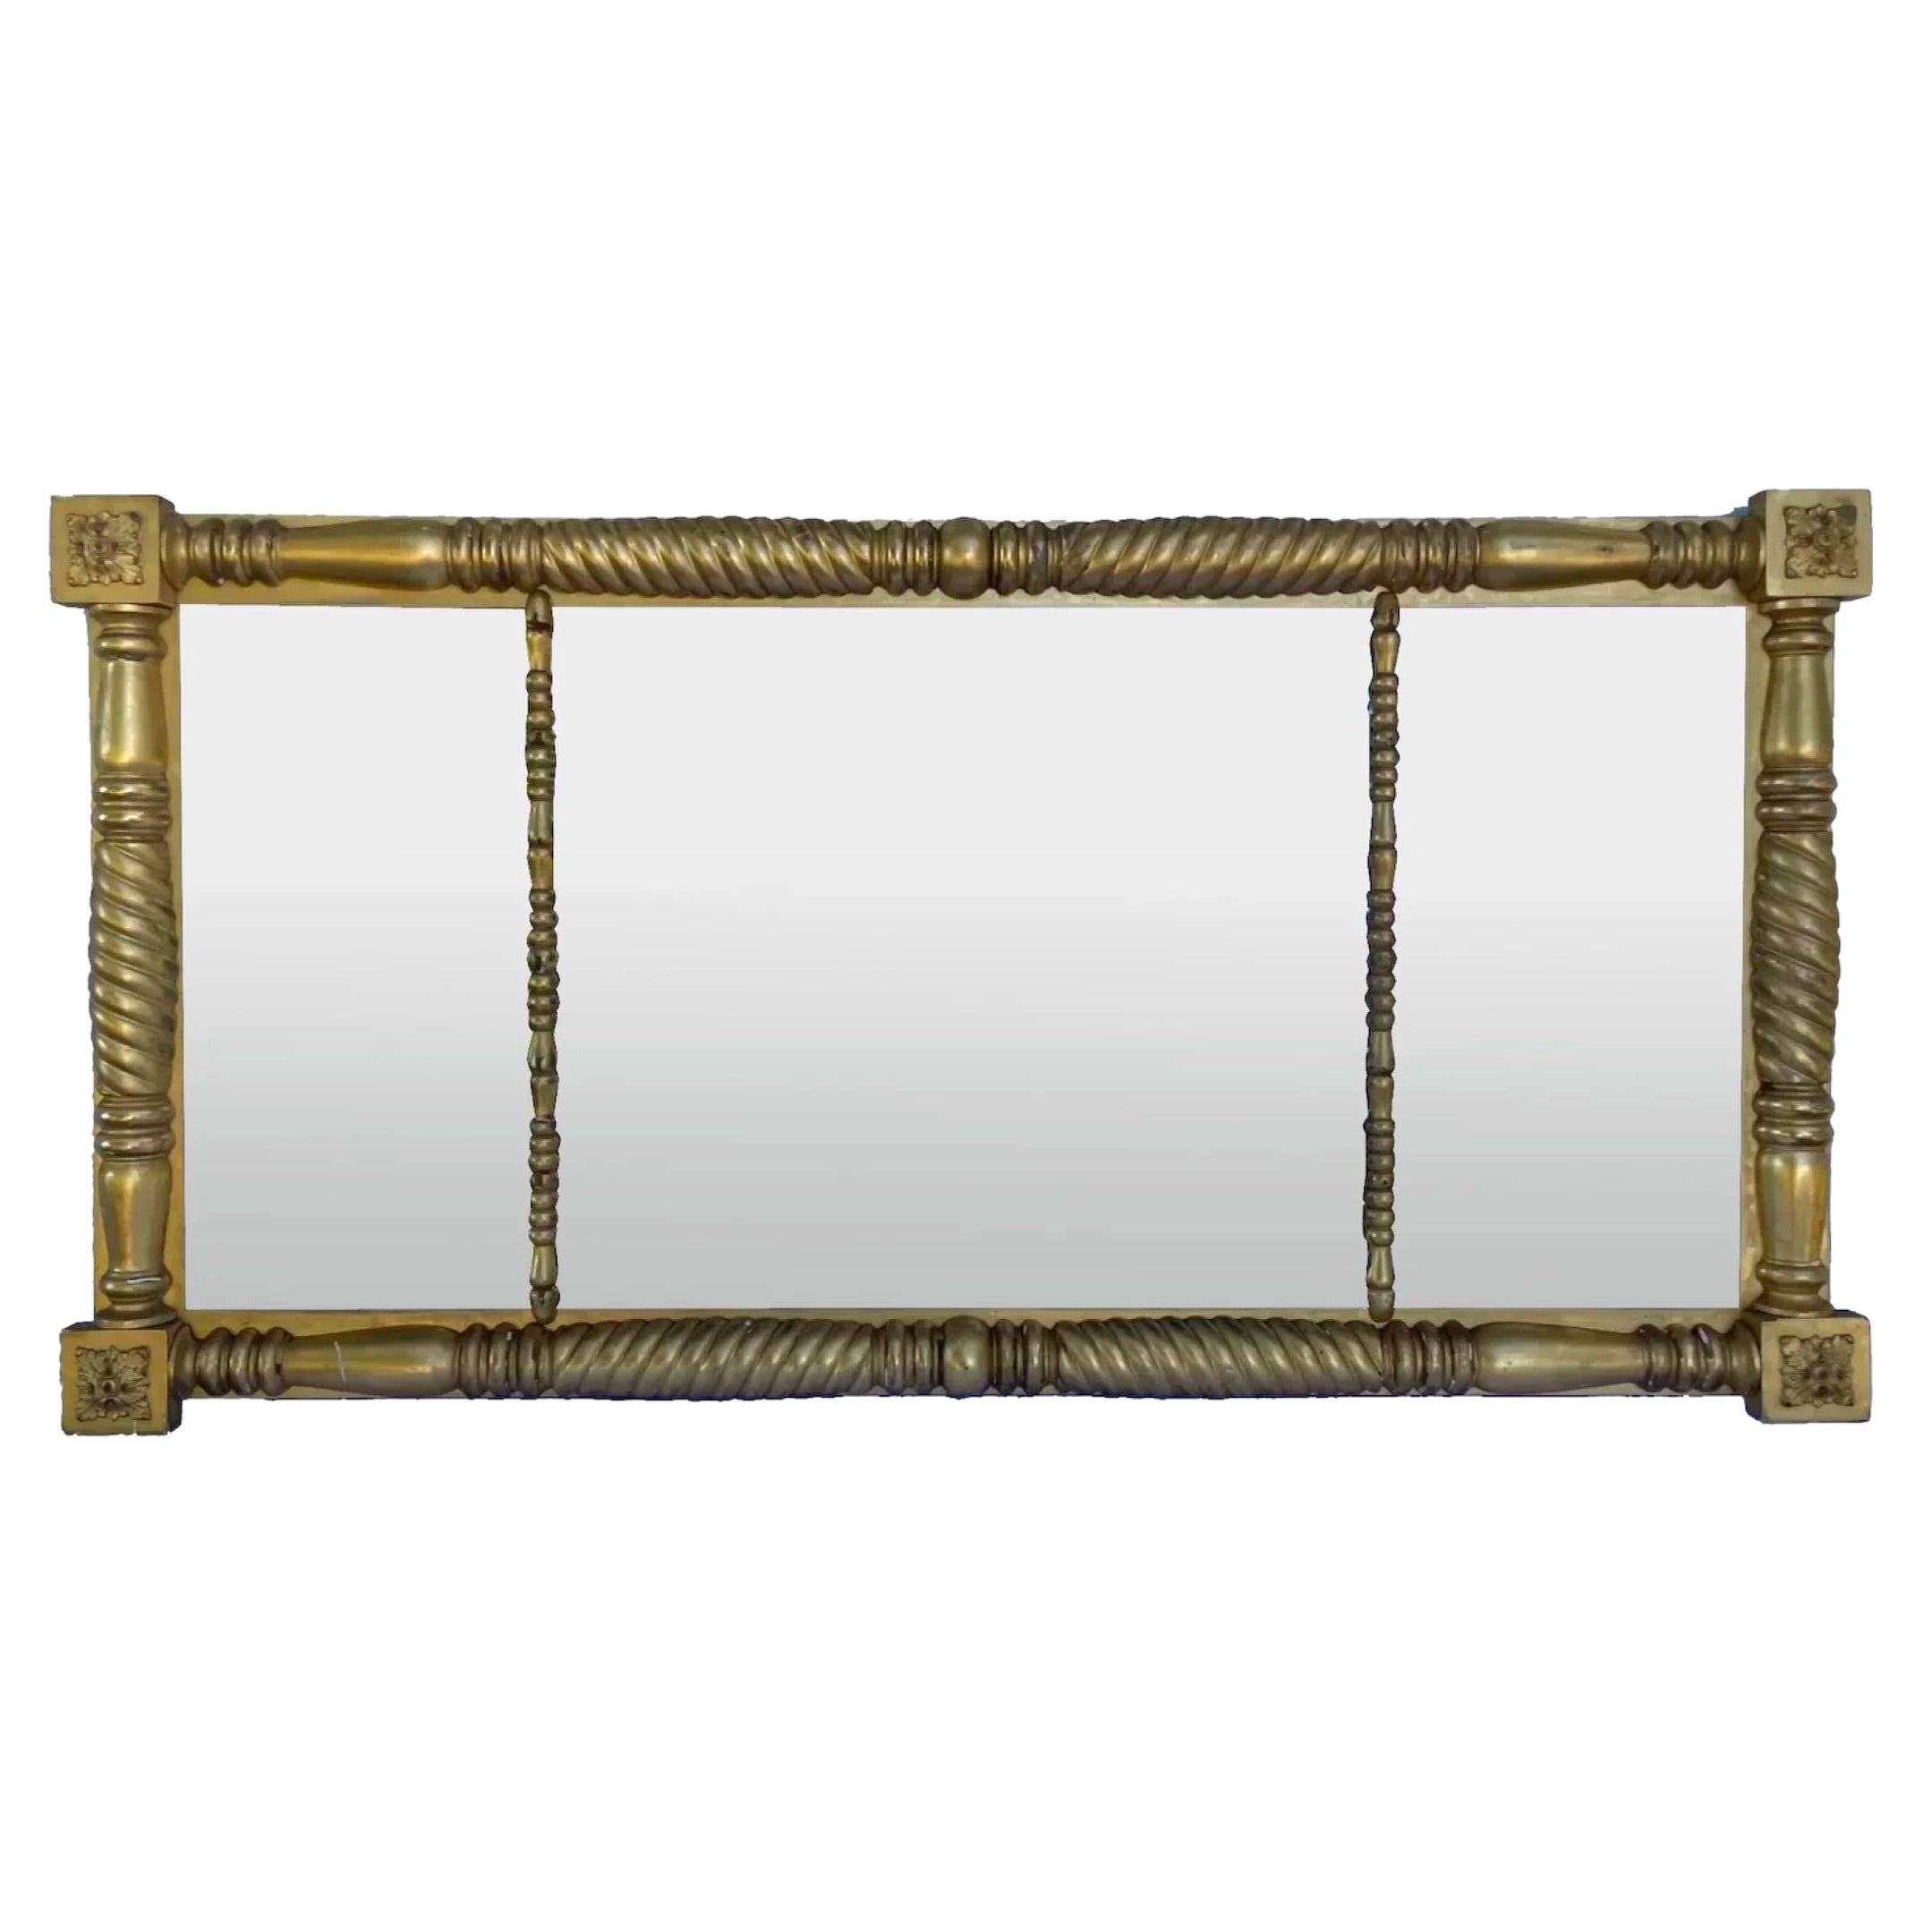 19th Century Large American Empire Gilt Wood Carved Overmantle Mirror ca. 1840